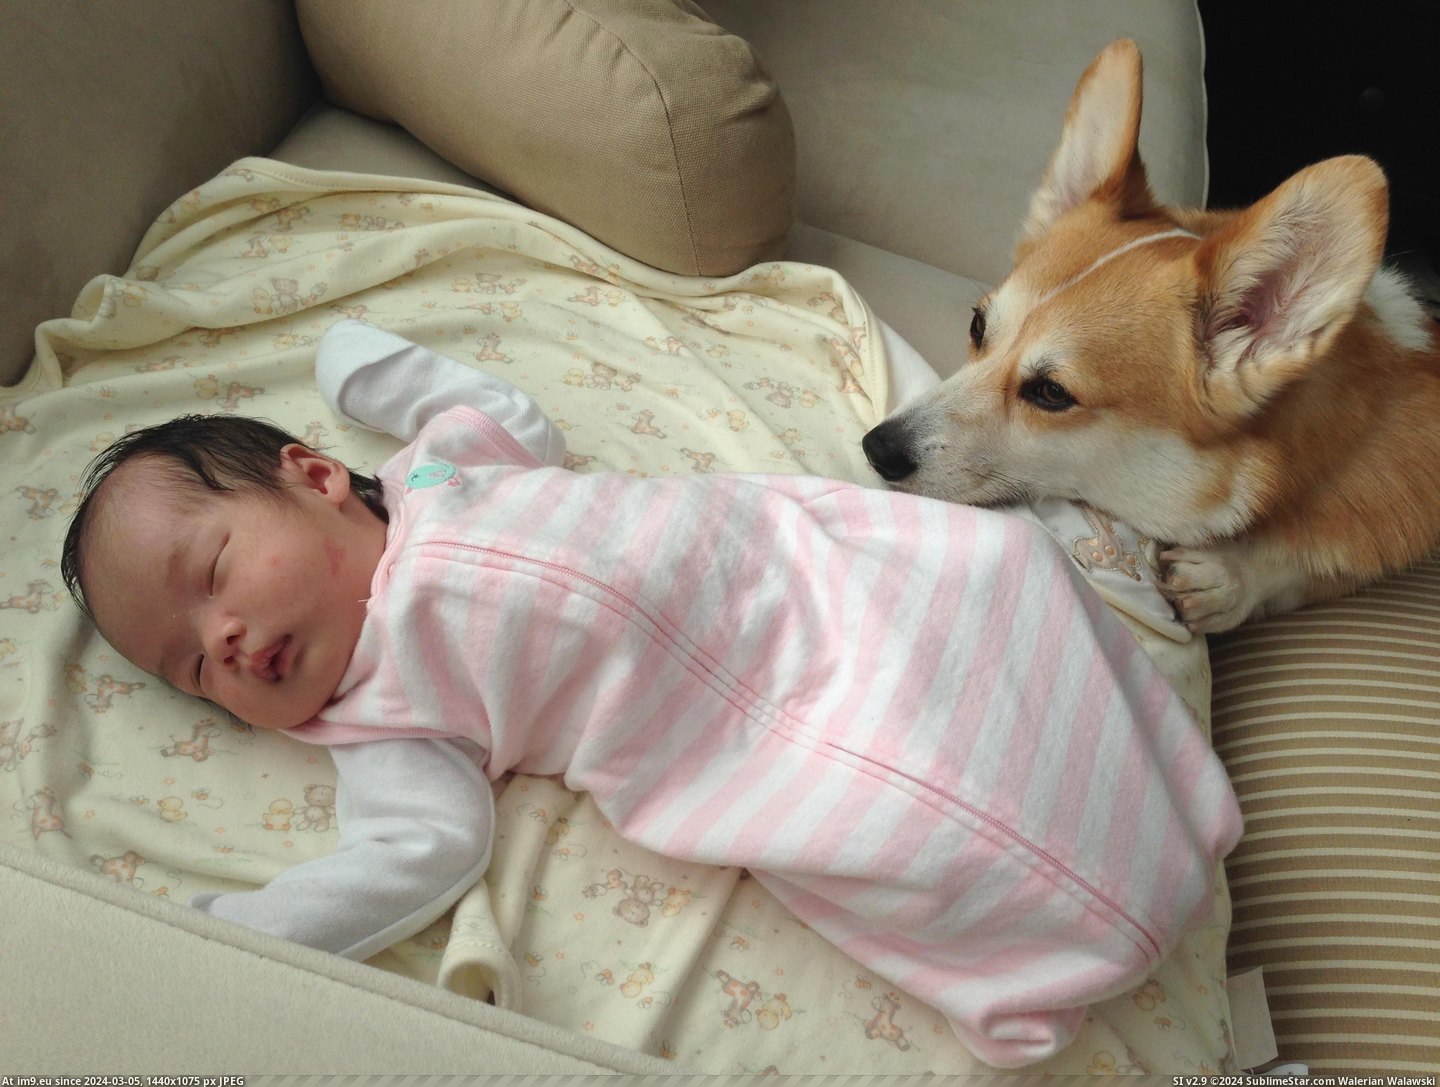 #Was #New #Ago #But #How #Daughter #Weeks #Born [Aww] My daughter was born three weeks ago. I worried about how my corgi would react but he's treating her like his new BFF... 3 Pic. (Bild von album My r/AWW favs))